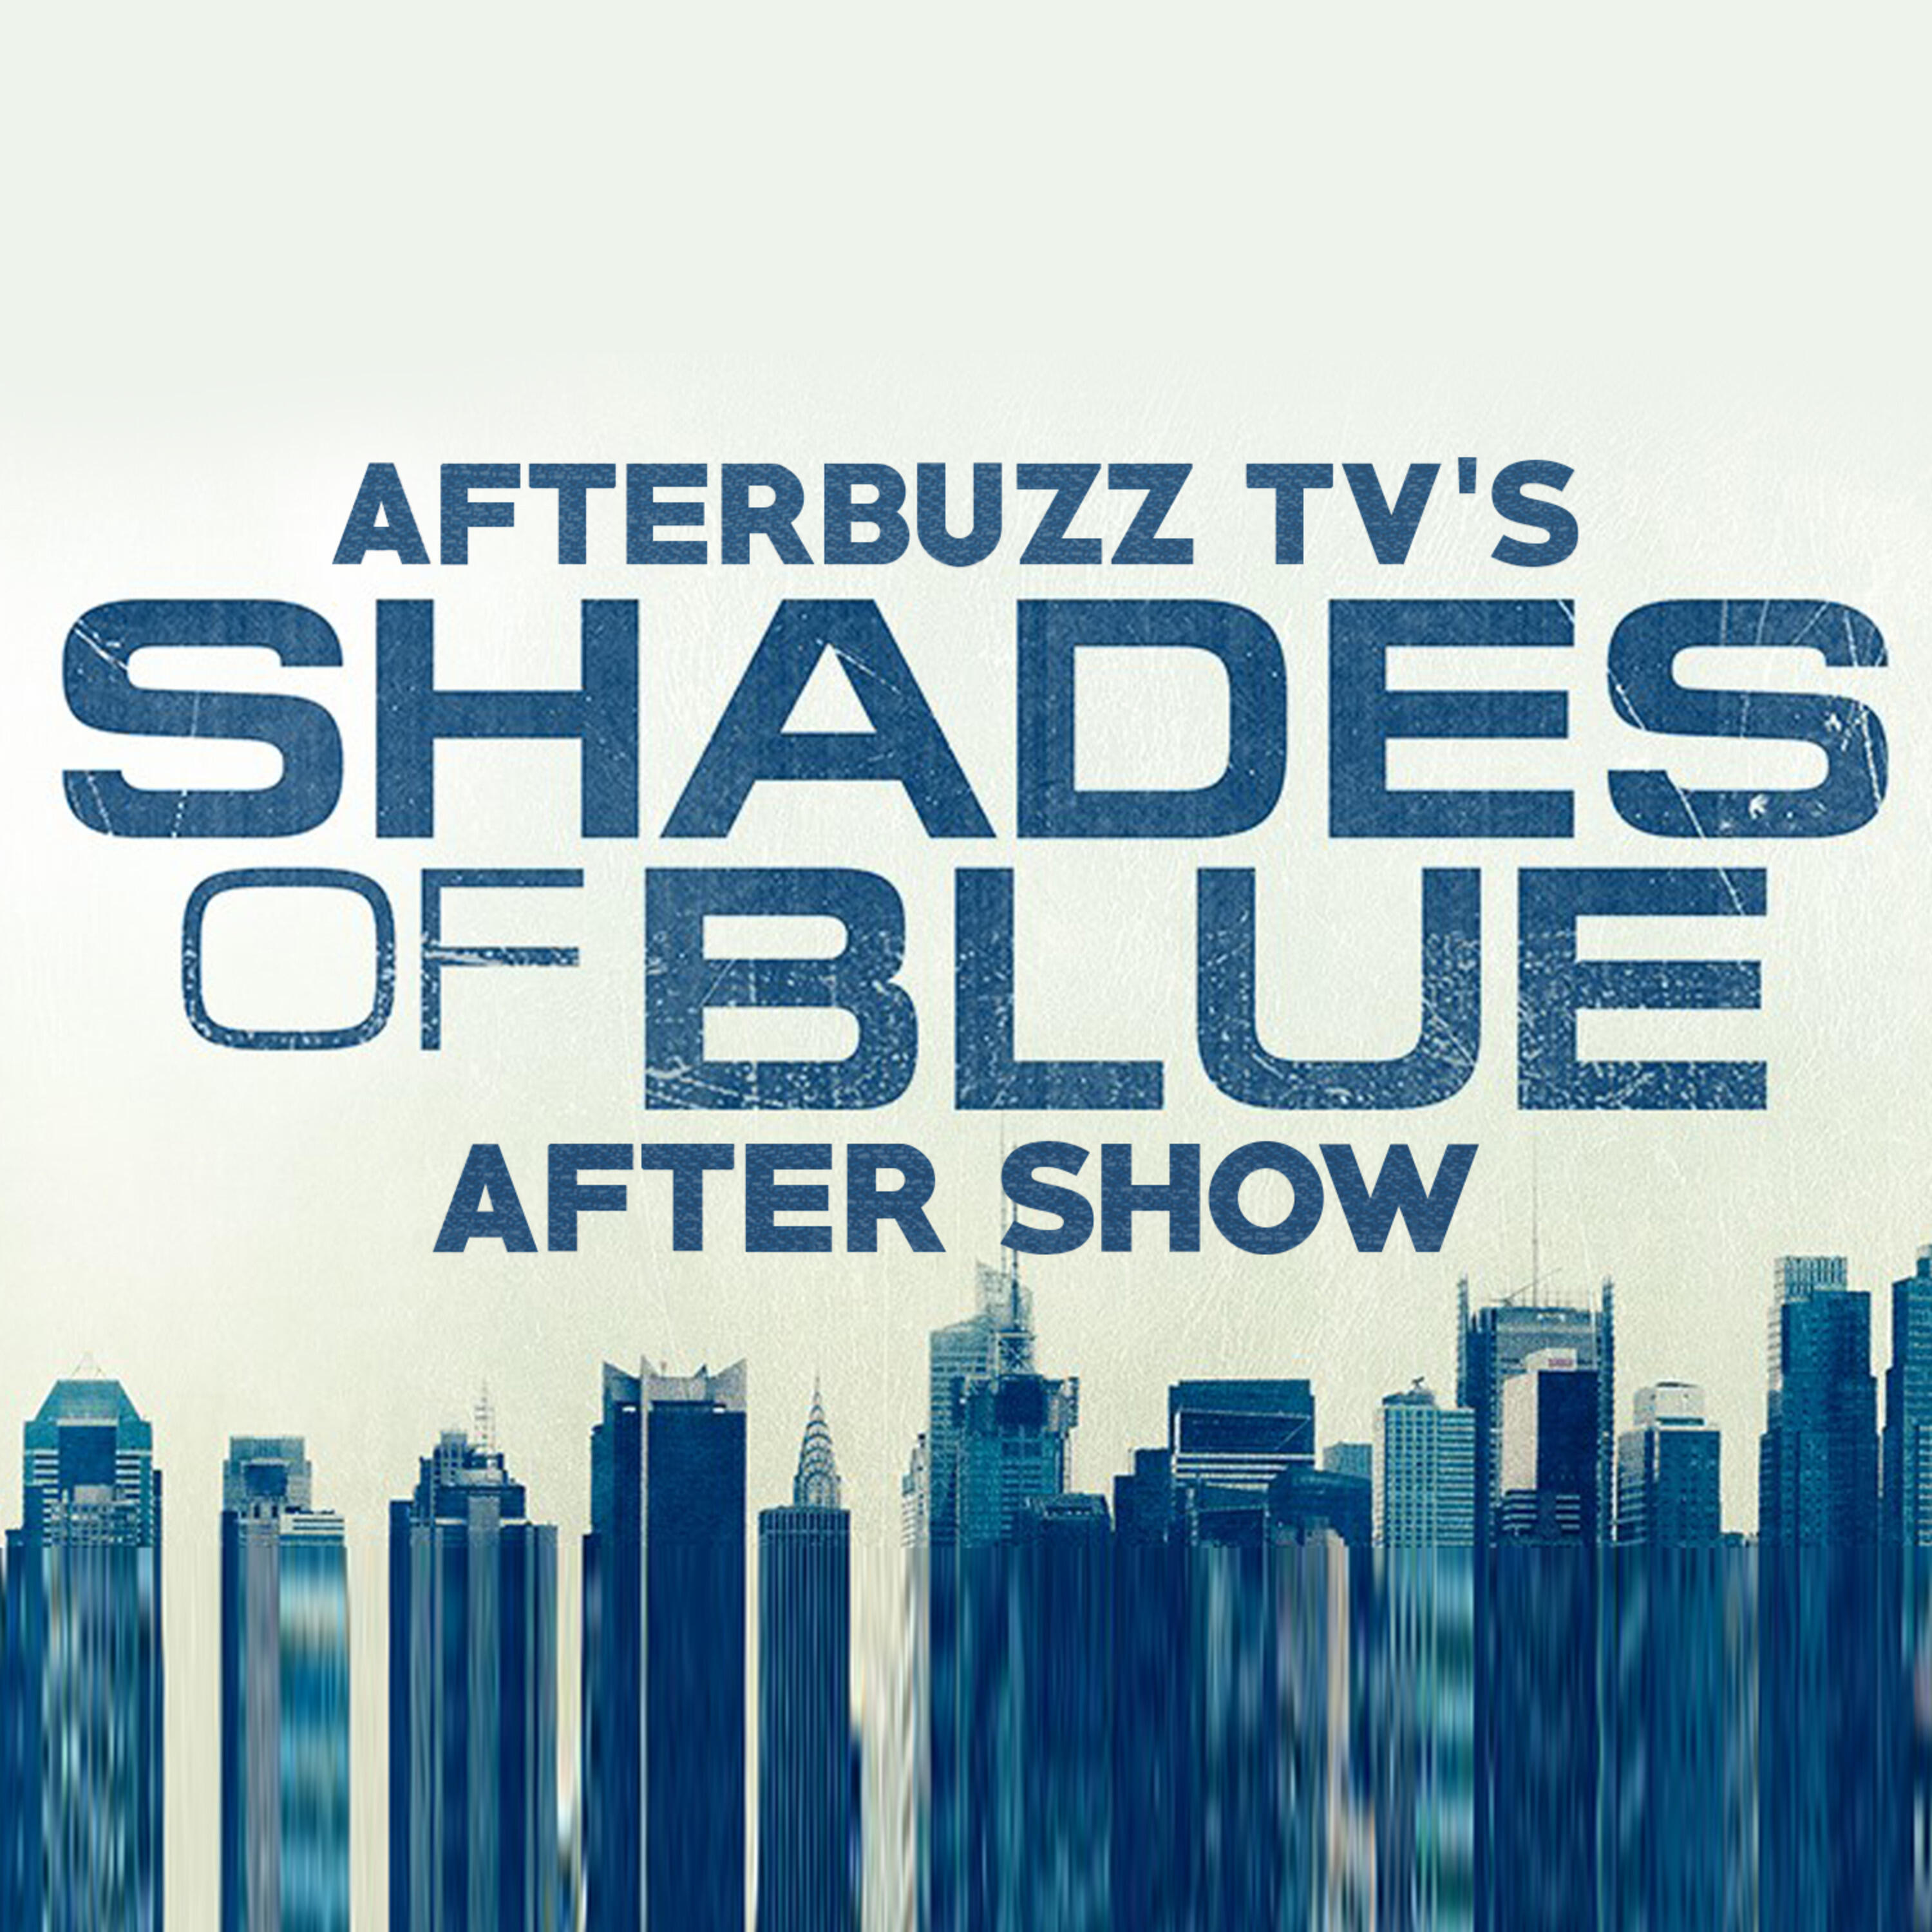 Blue s better. Shades of Blue. AFTERSHOW. After show. Blue one.